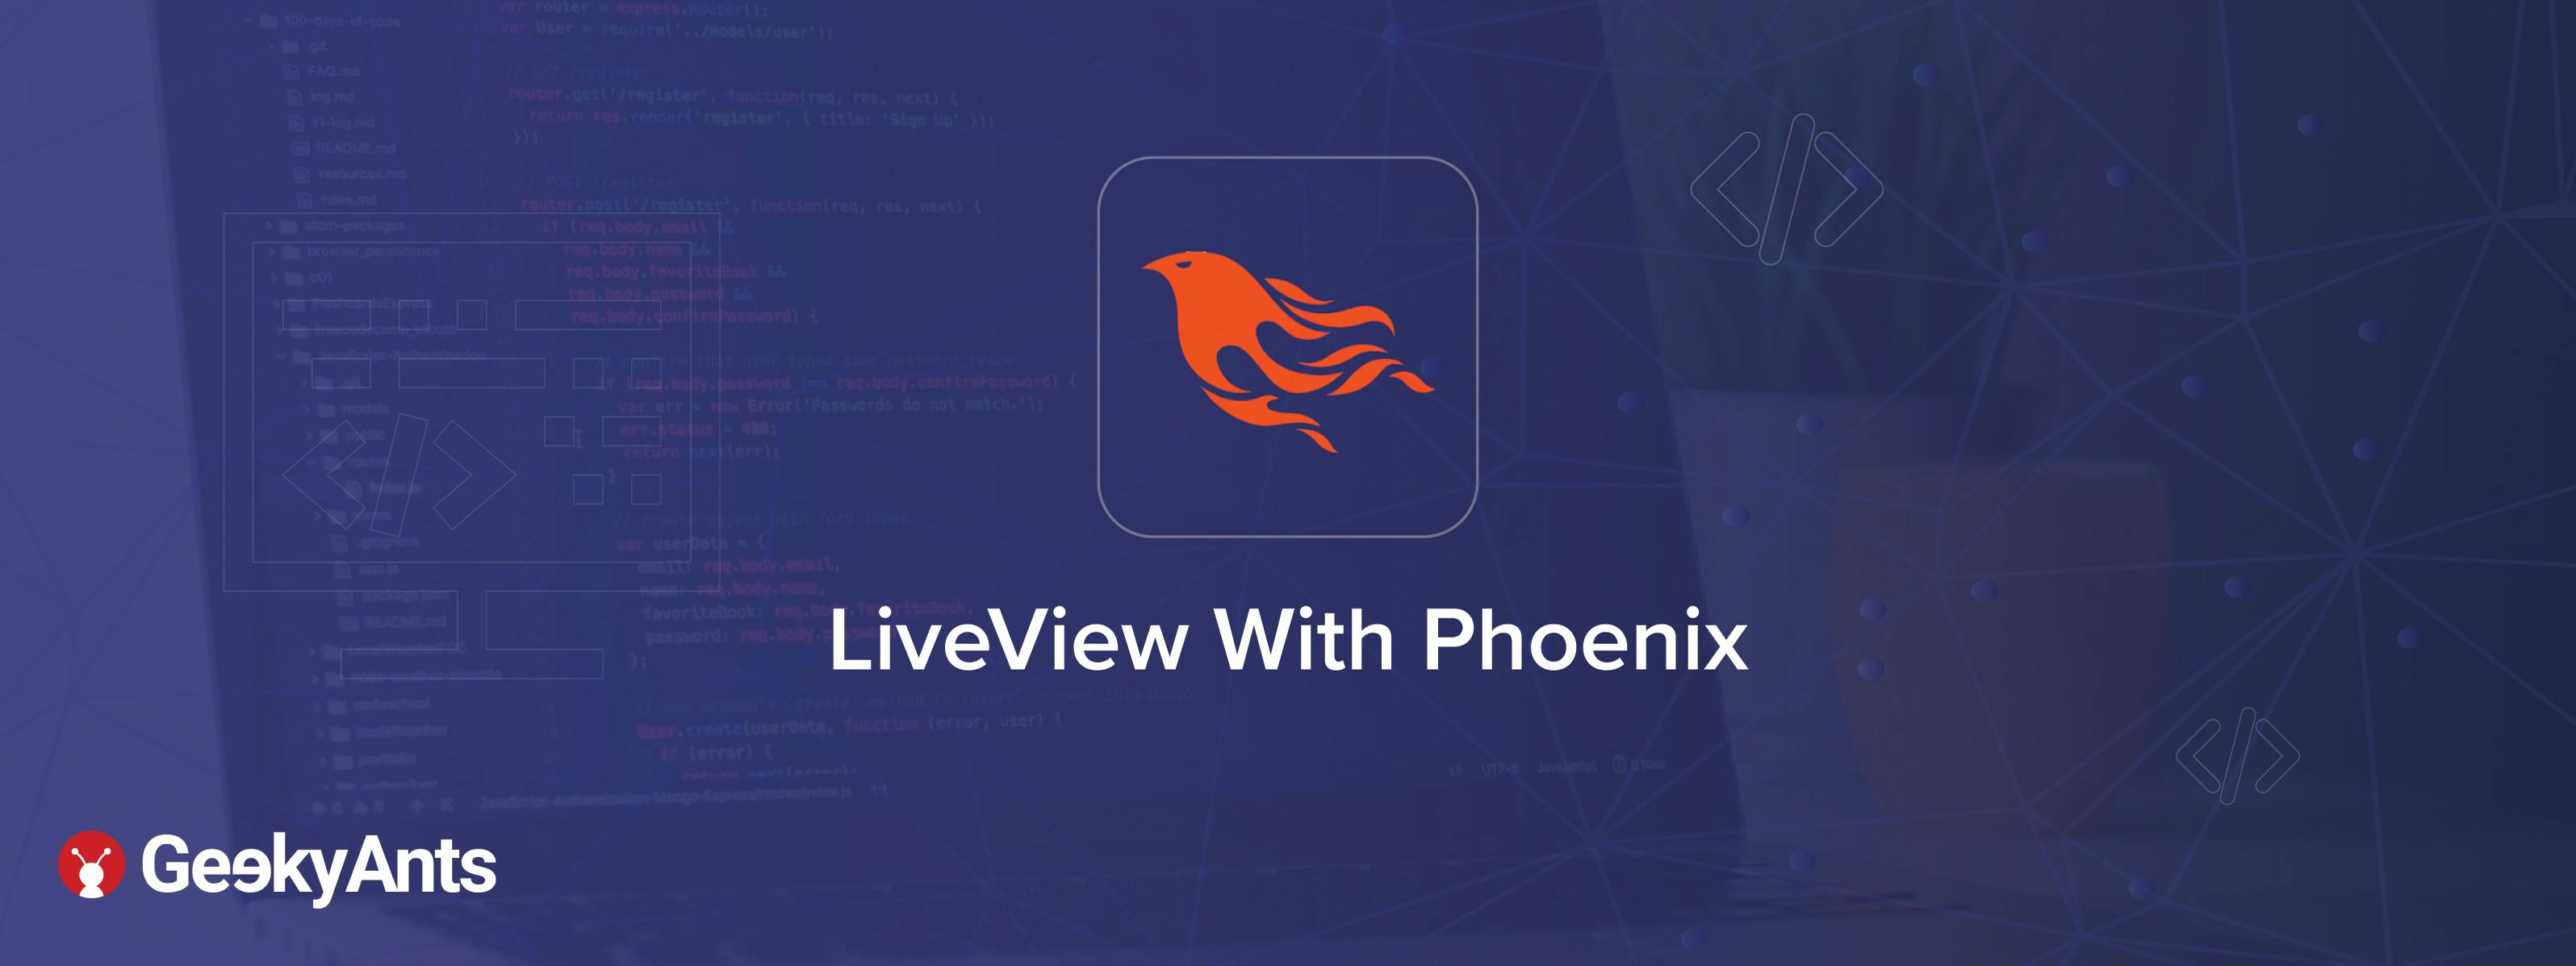 LiveView With Phoenix